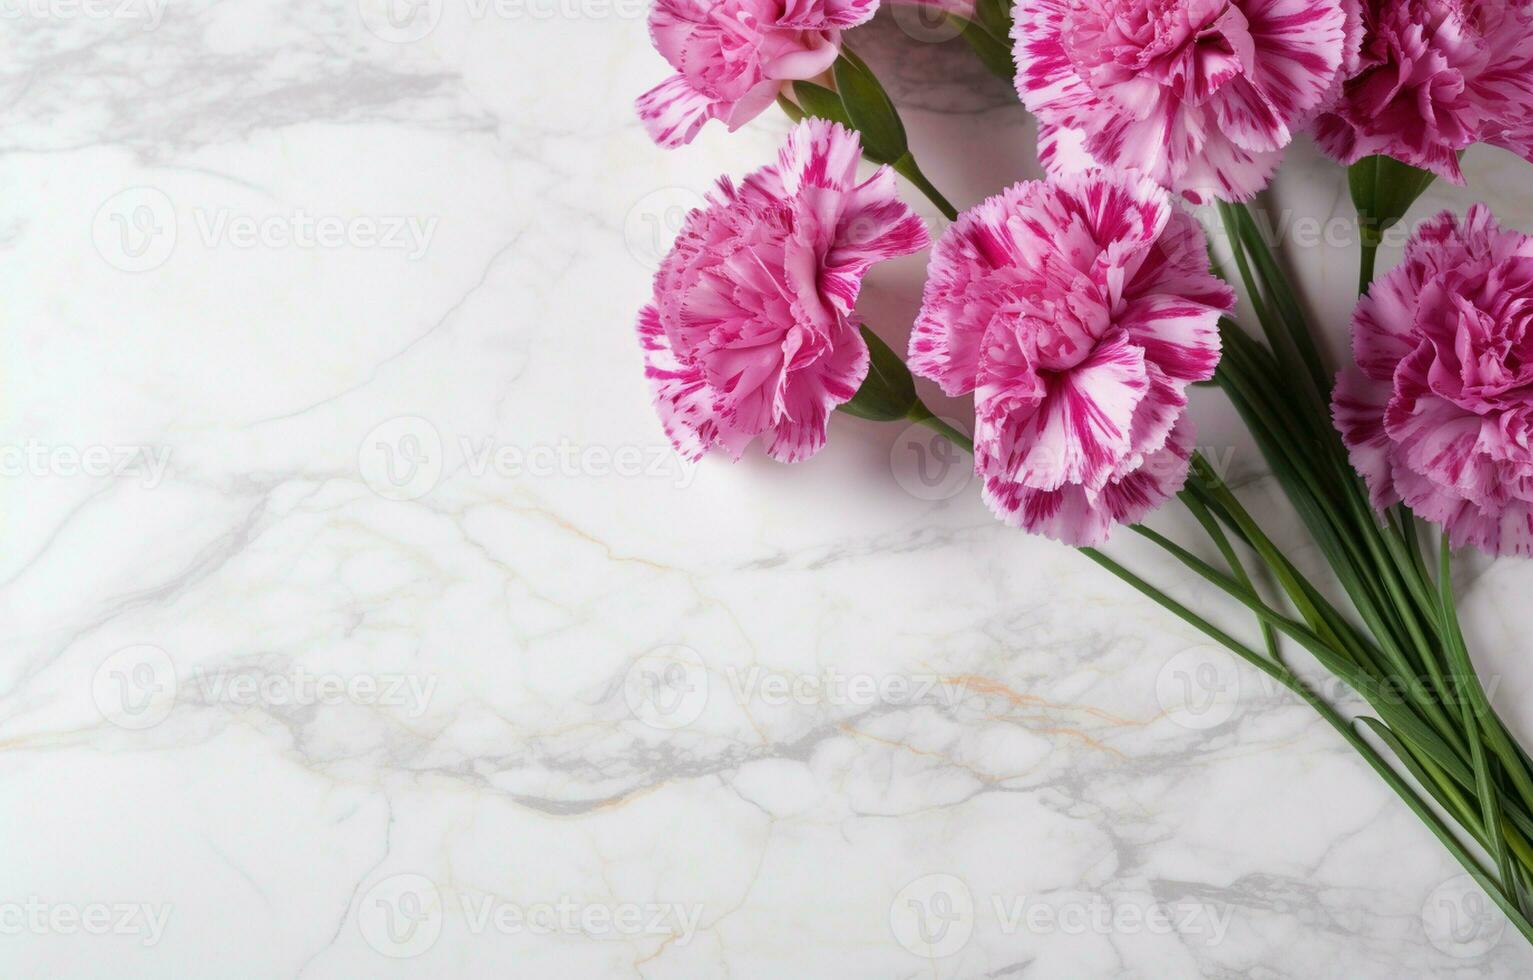 Carnations are beautiful flowers set against a marble background. photo